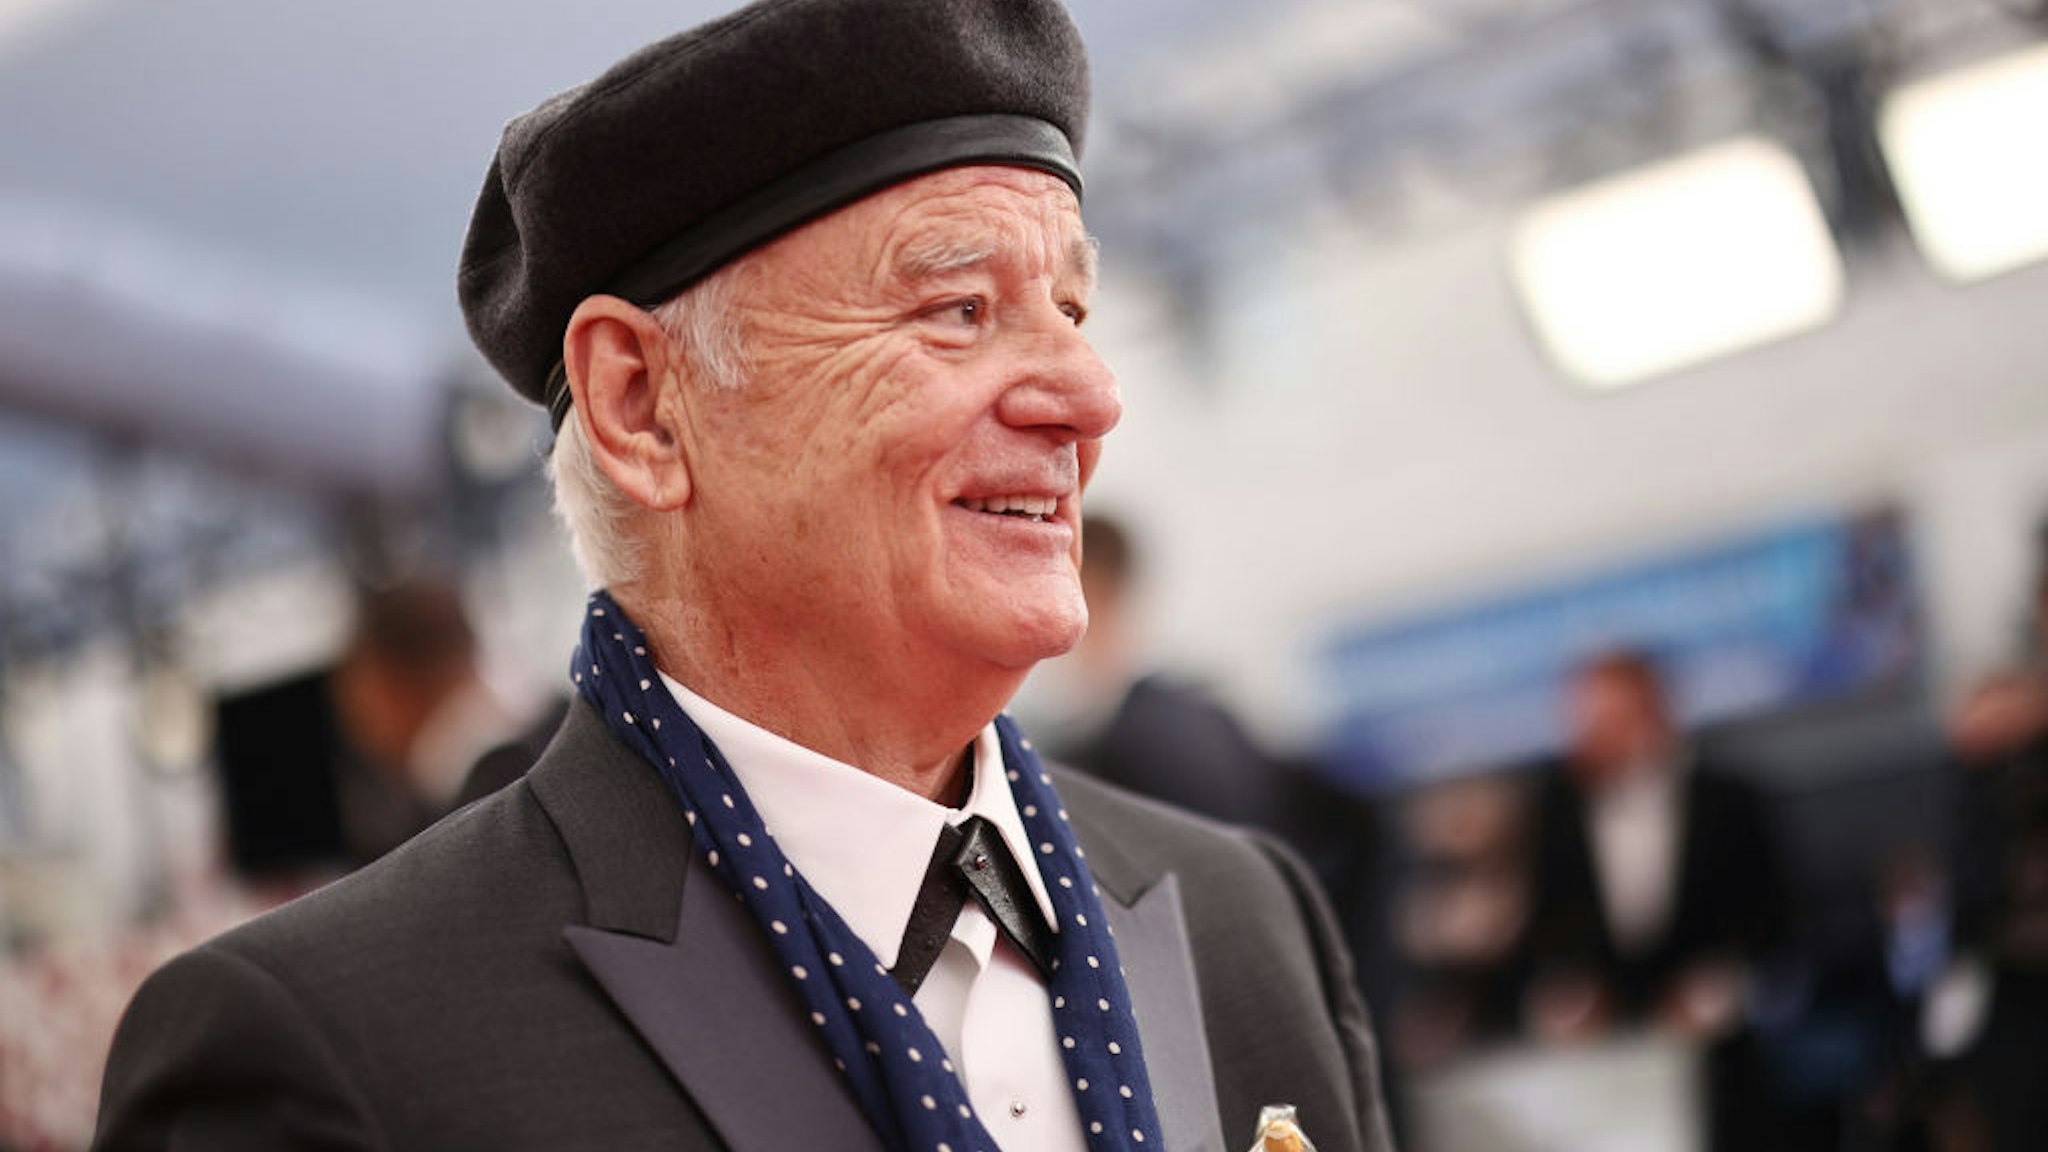 HOLLYWOOD, CALIFORNIA - MARCH 27: Bill Murray attends the 94th Annual Academy Awards at Hollywood and Highland on March 27, 2022 in Hollywood, California. (Photo by Emma McIntyre/Getty Images)